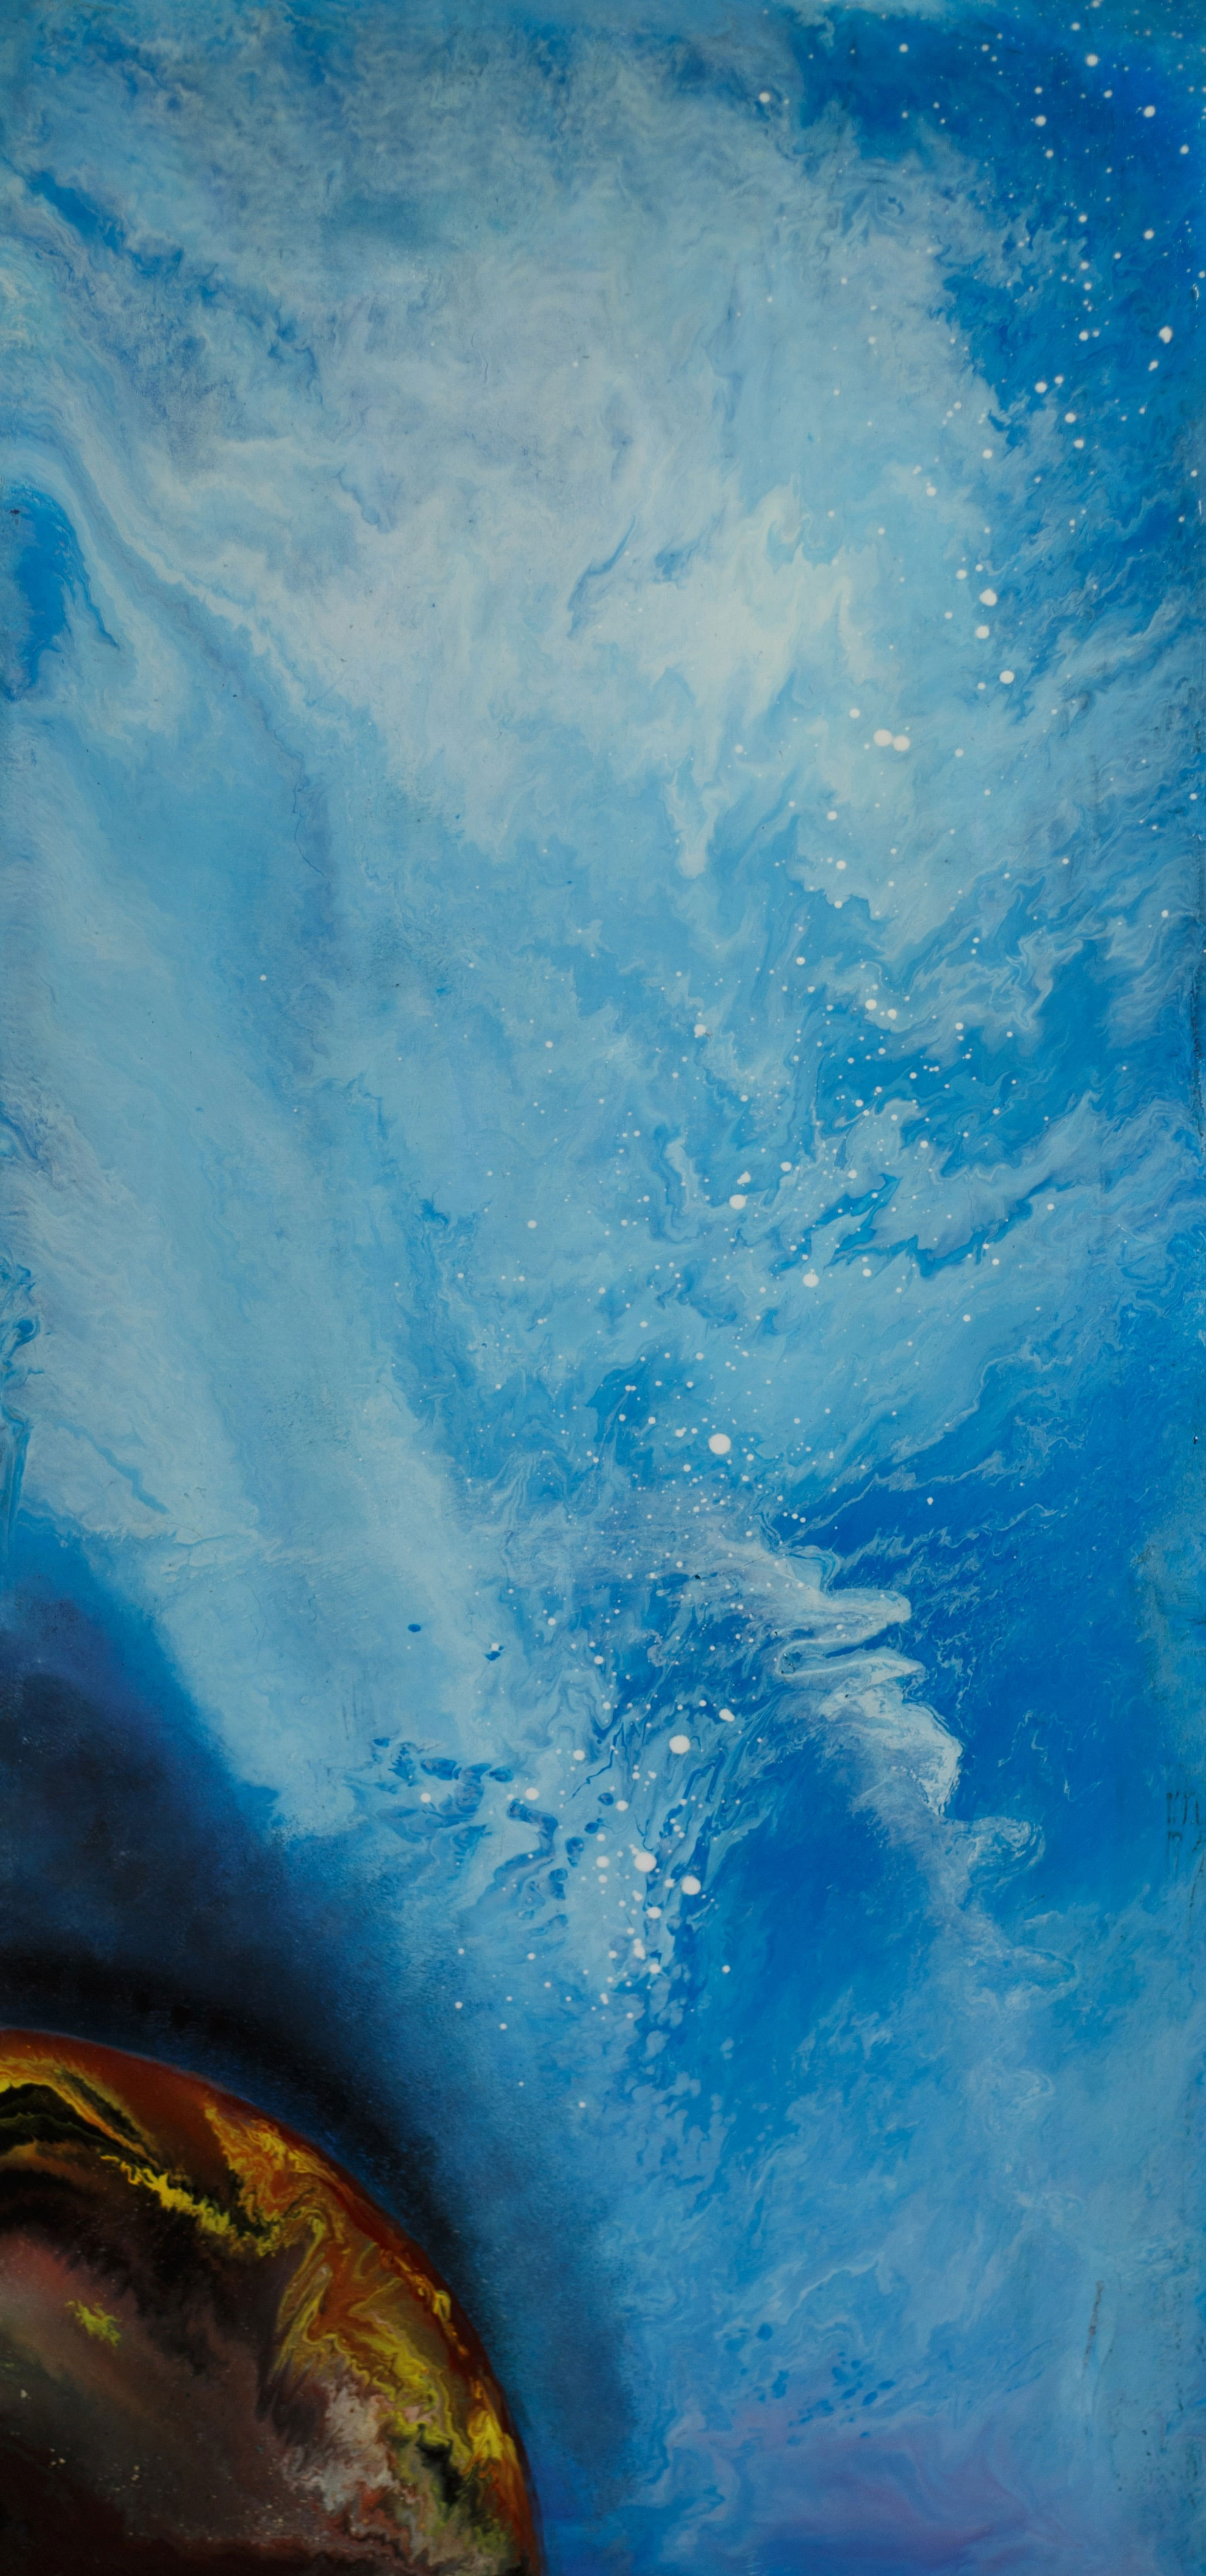 Alla Struchayeva. Painting "The Radiance of the Blue Universe"